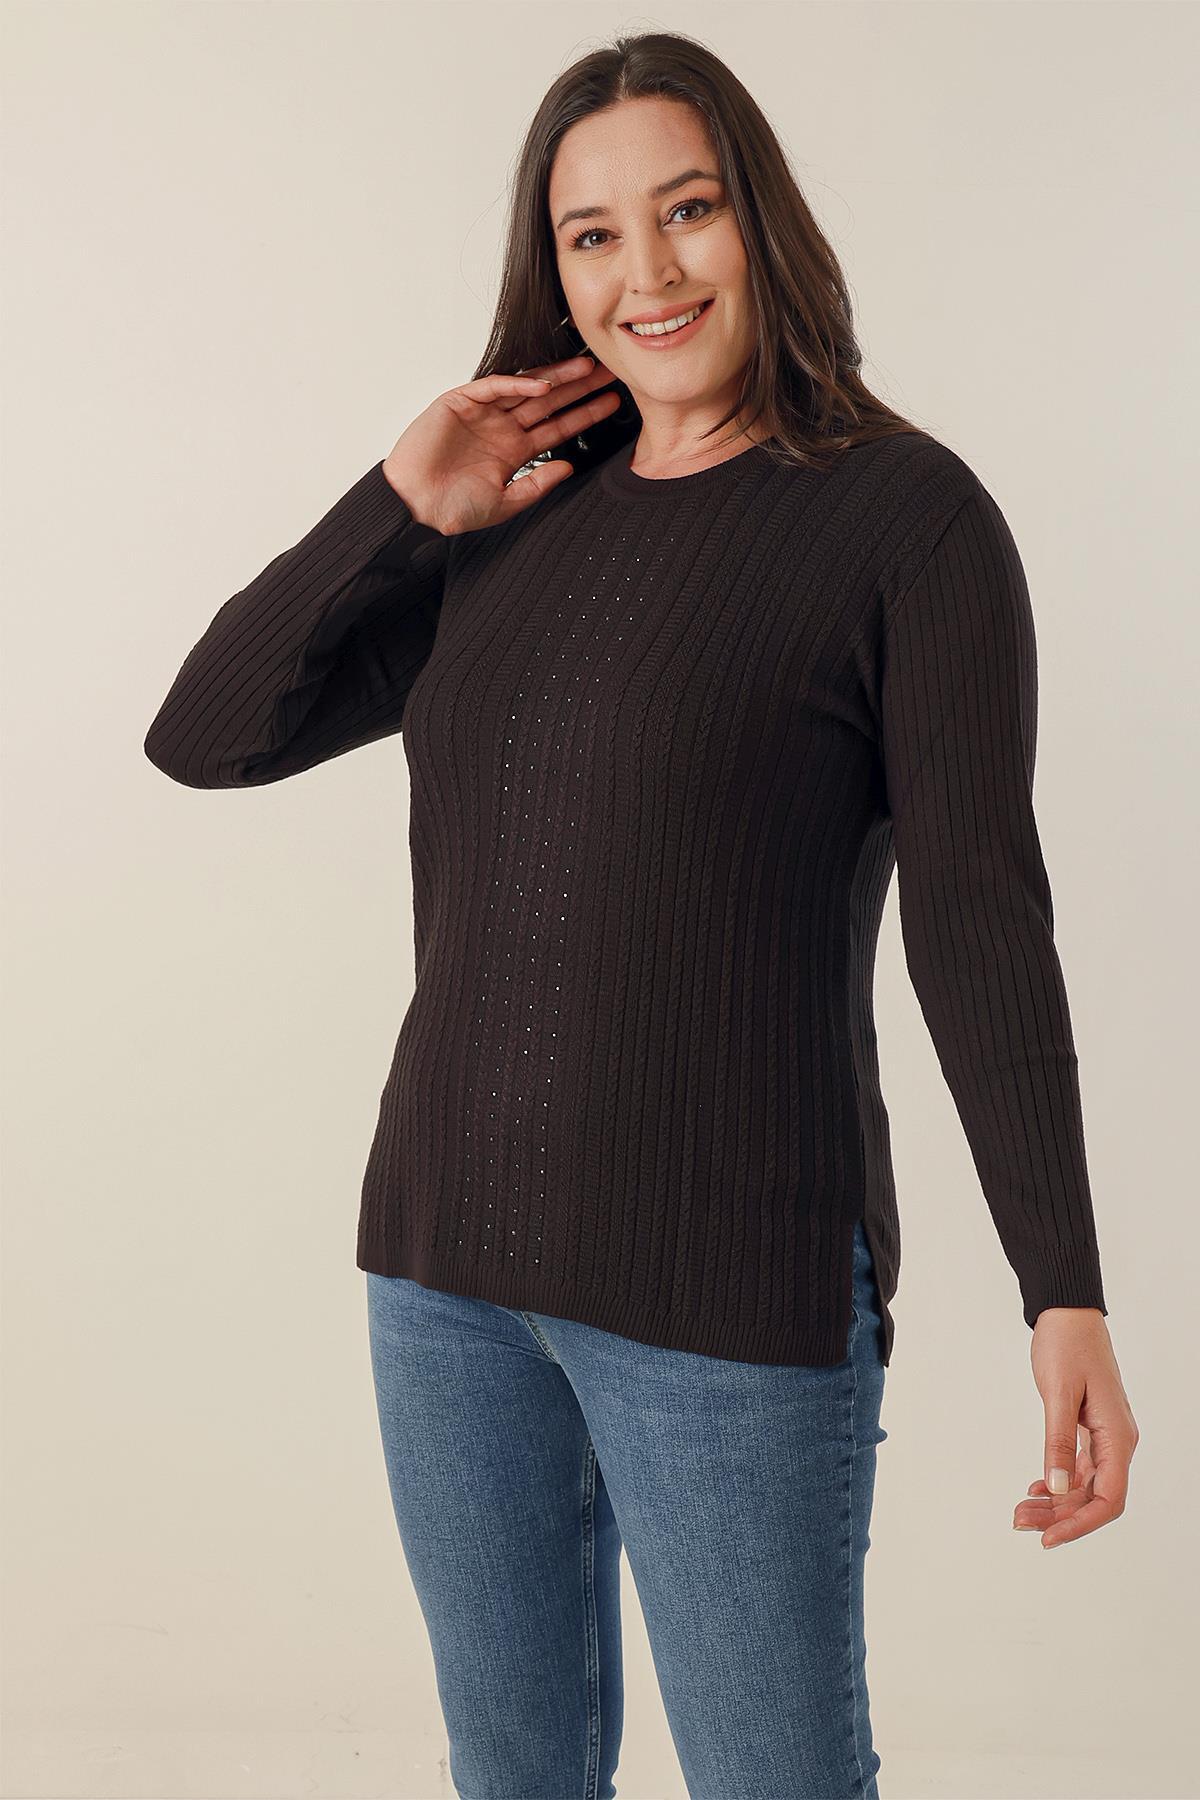 By Saygı Hair Braided Front Bead Detail Plus Size Sweater